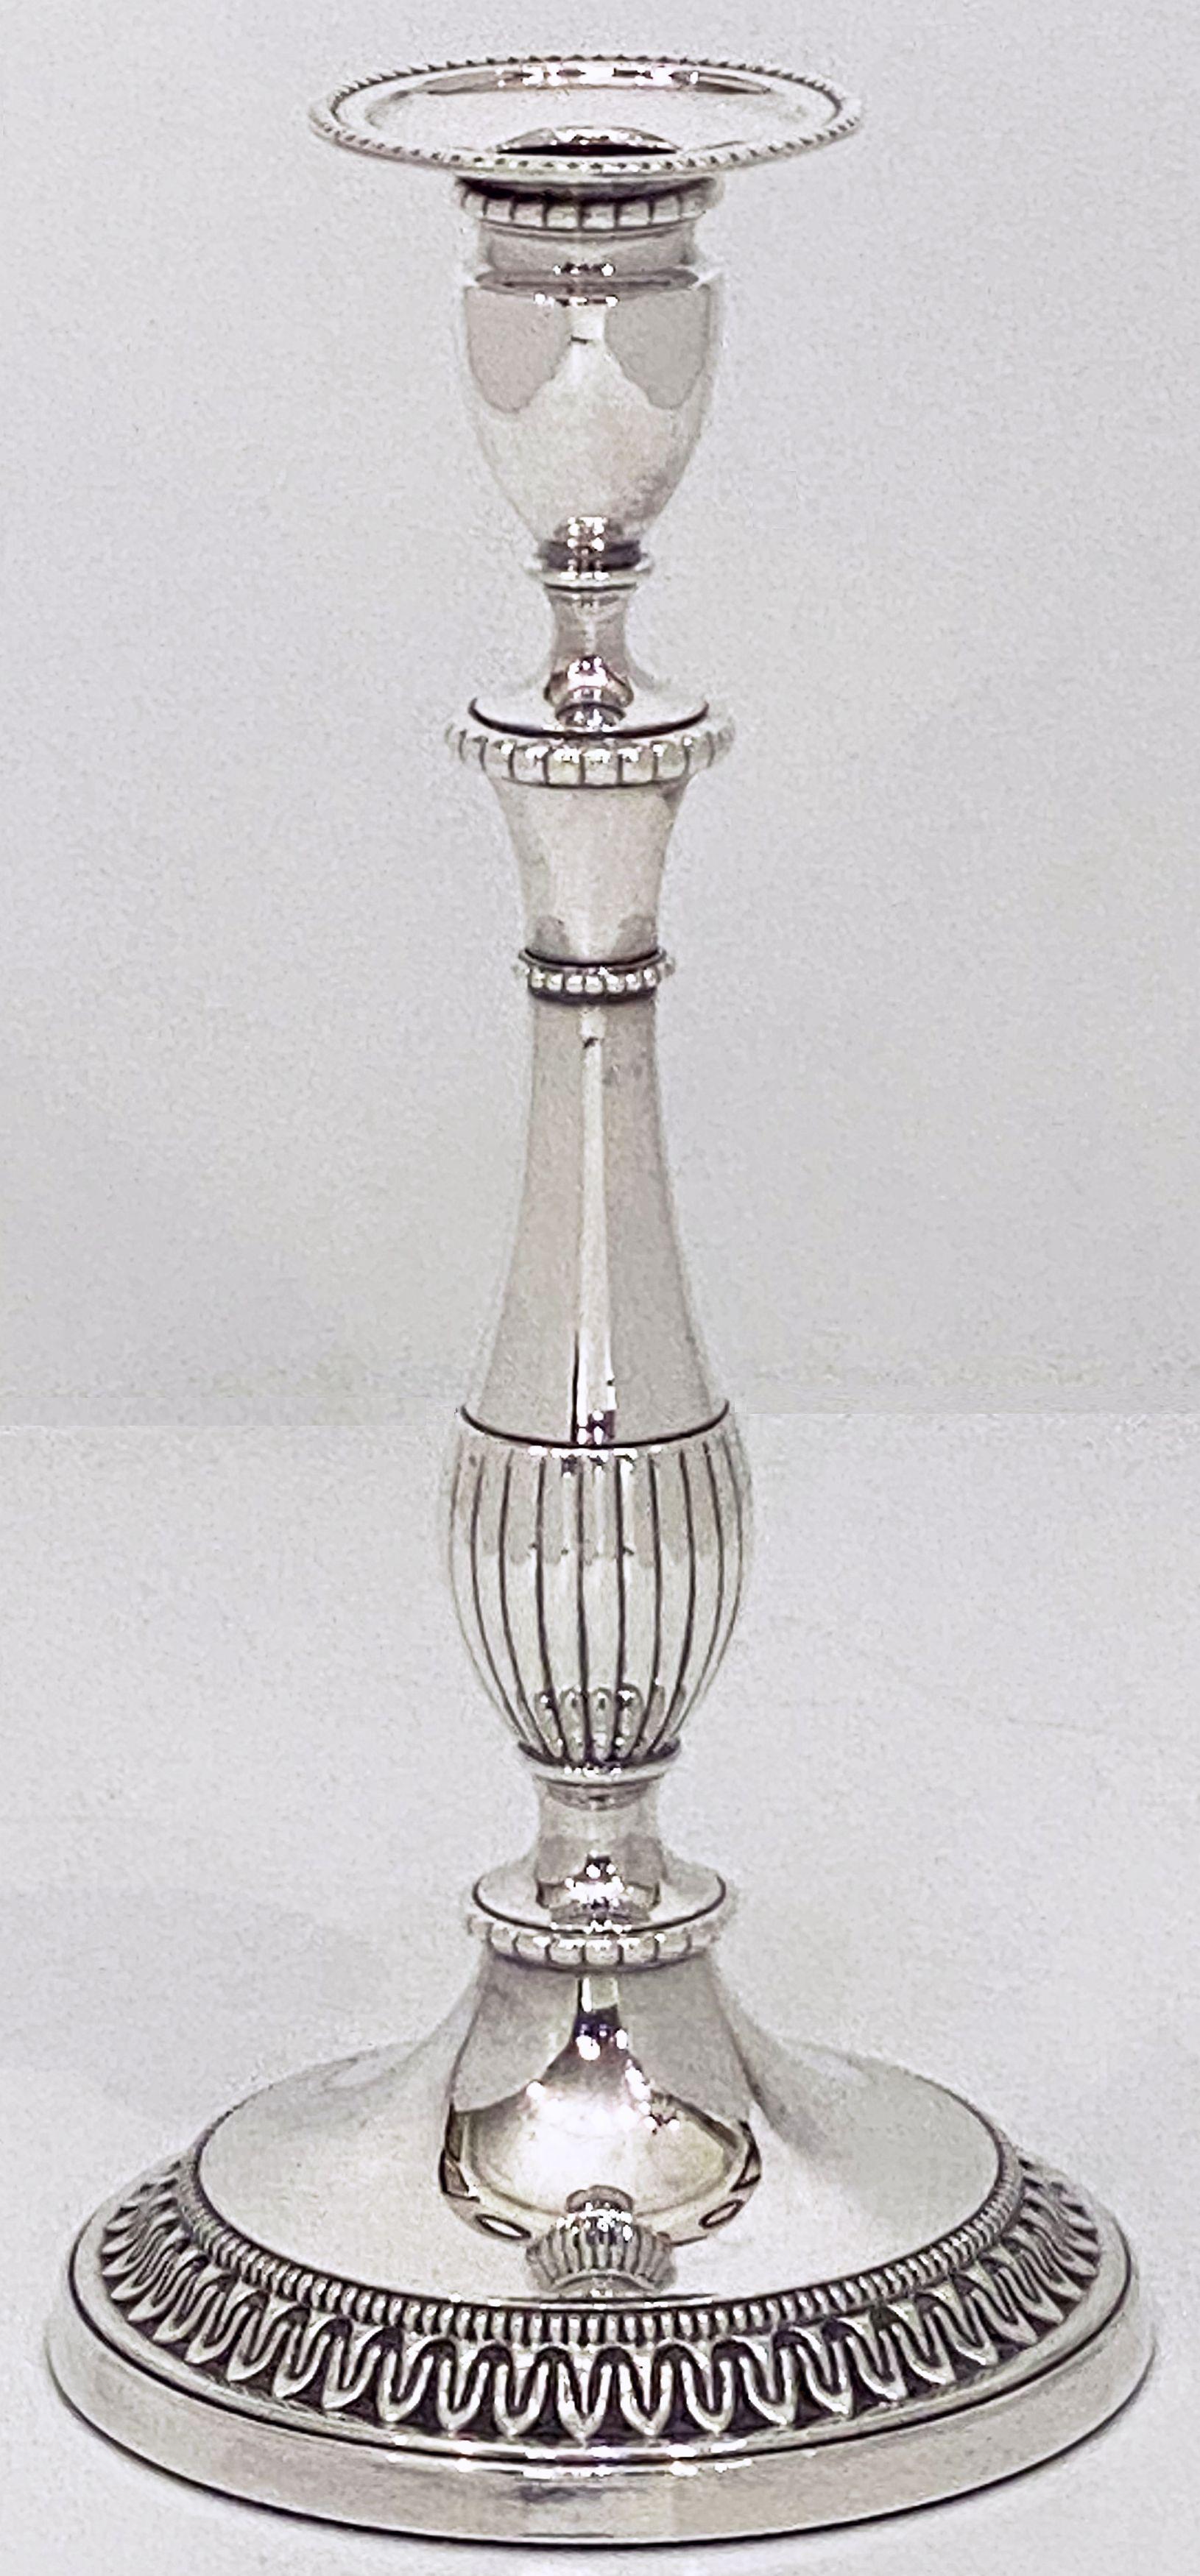 A handsome pair of English candlestick holders of fine plate silver featuring a relief with a neo-classical design.